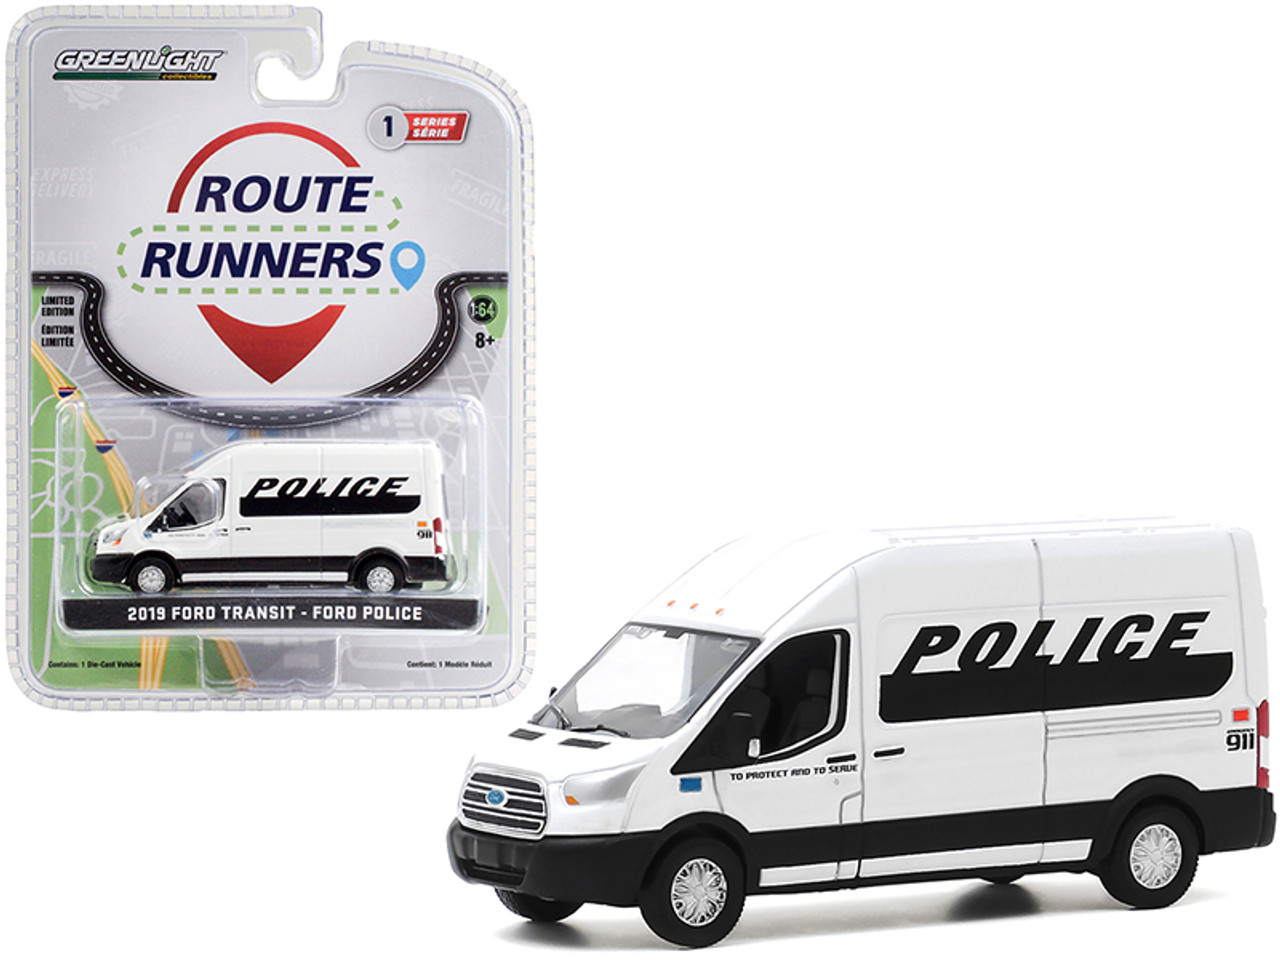 2019 Ford Transit High Roof Van "Police" White and Black "Route Runners" Series 1 1/64 Diecast Model by Greenlight